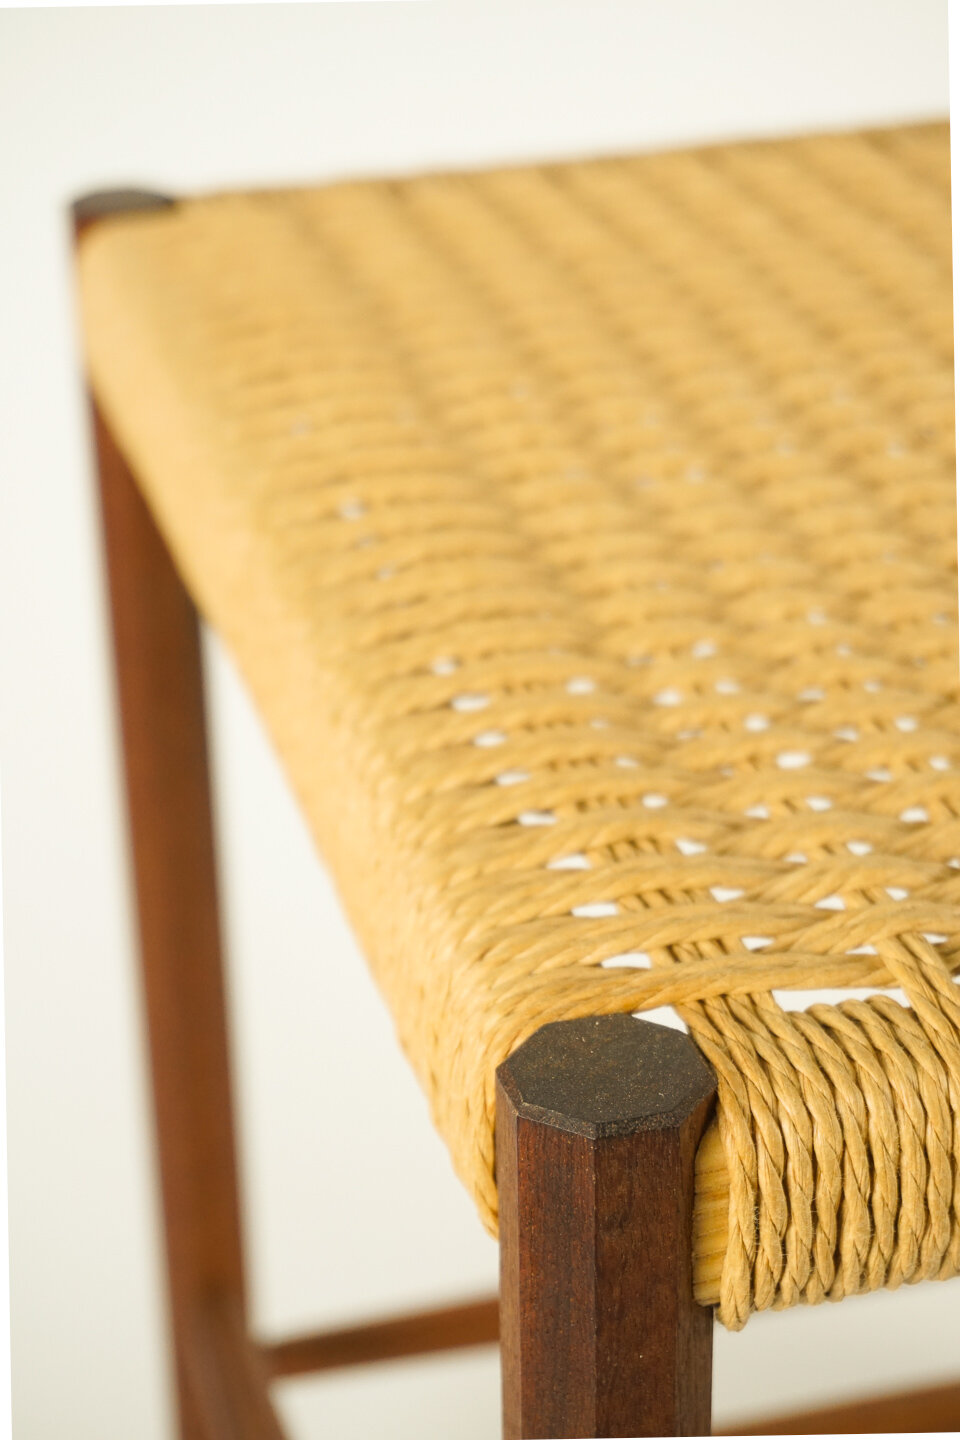 Build a Post and Rung Stool with Danish Cord Seat — Port Townsend School of  Woodworking